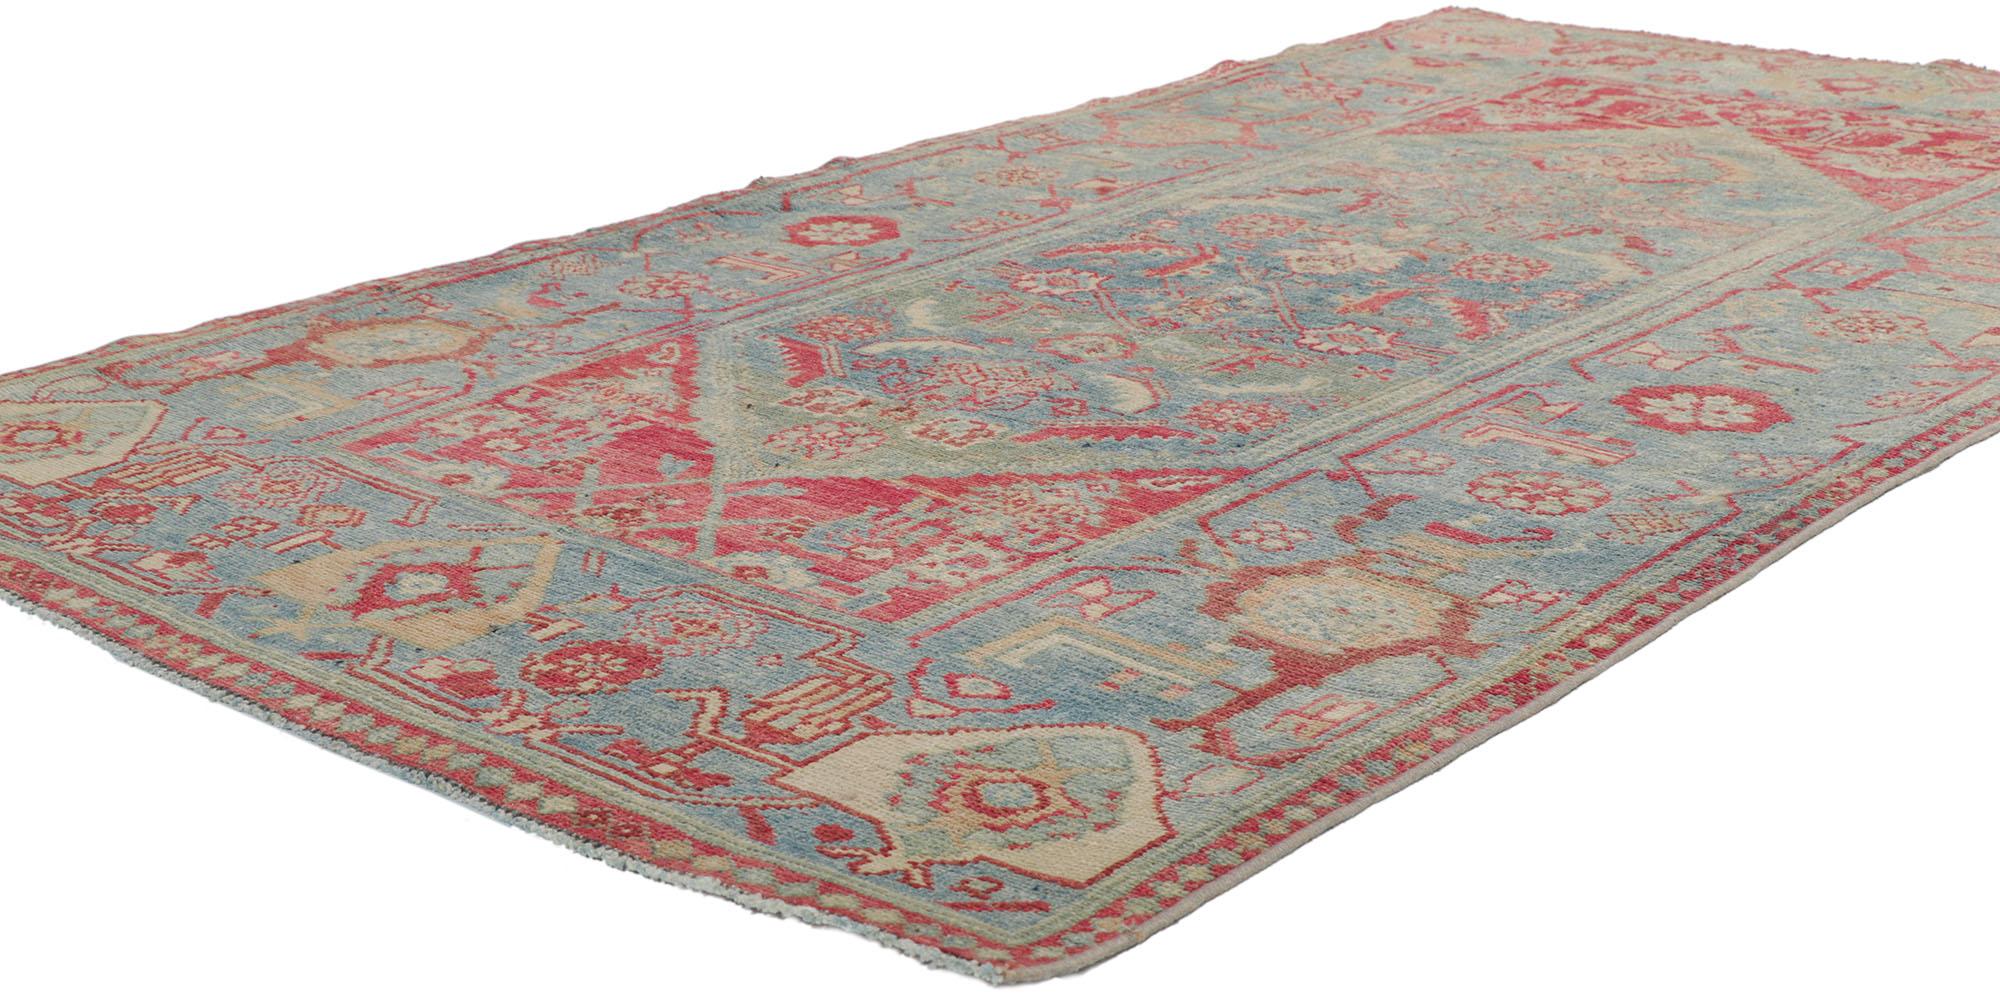 53769 Distressed Antique Persian Malayer Rug, 03'09 x 06'10. Emanating sophistication and bohemian charm, this hand knotted wool distressed antique Persian Malayer rug beautifully embodies rustic boho chic style. The abrashed blue field features an